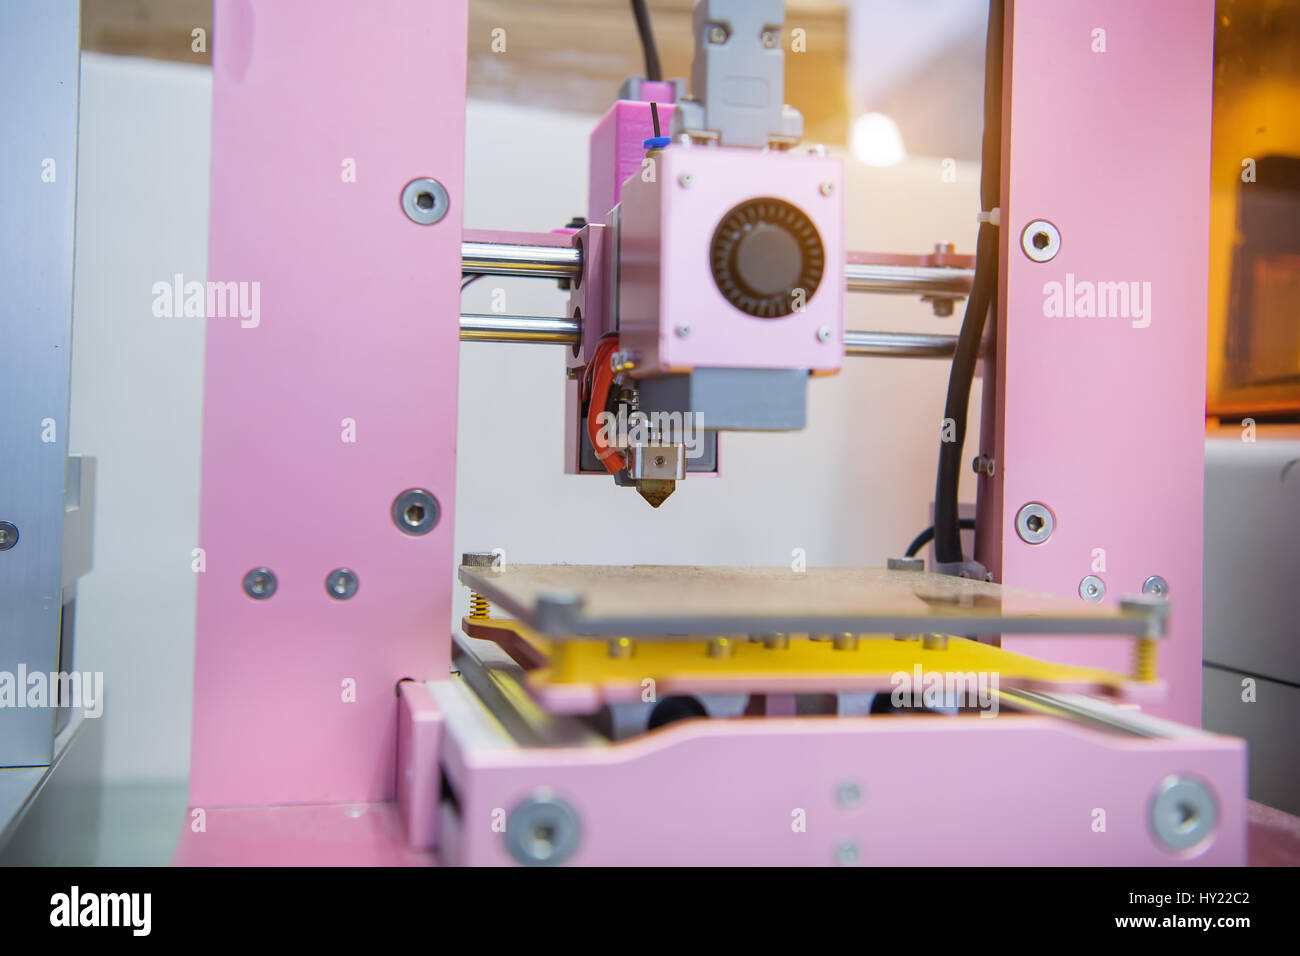 3D printer on a pink background Stock Photo